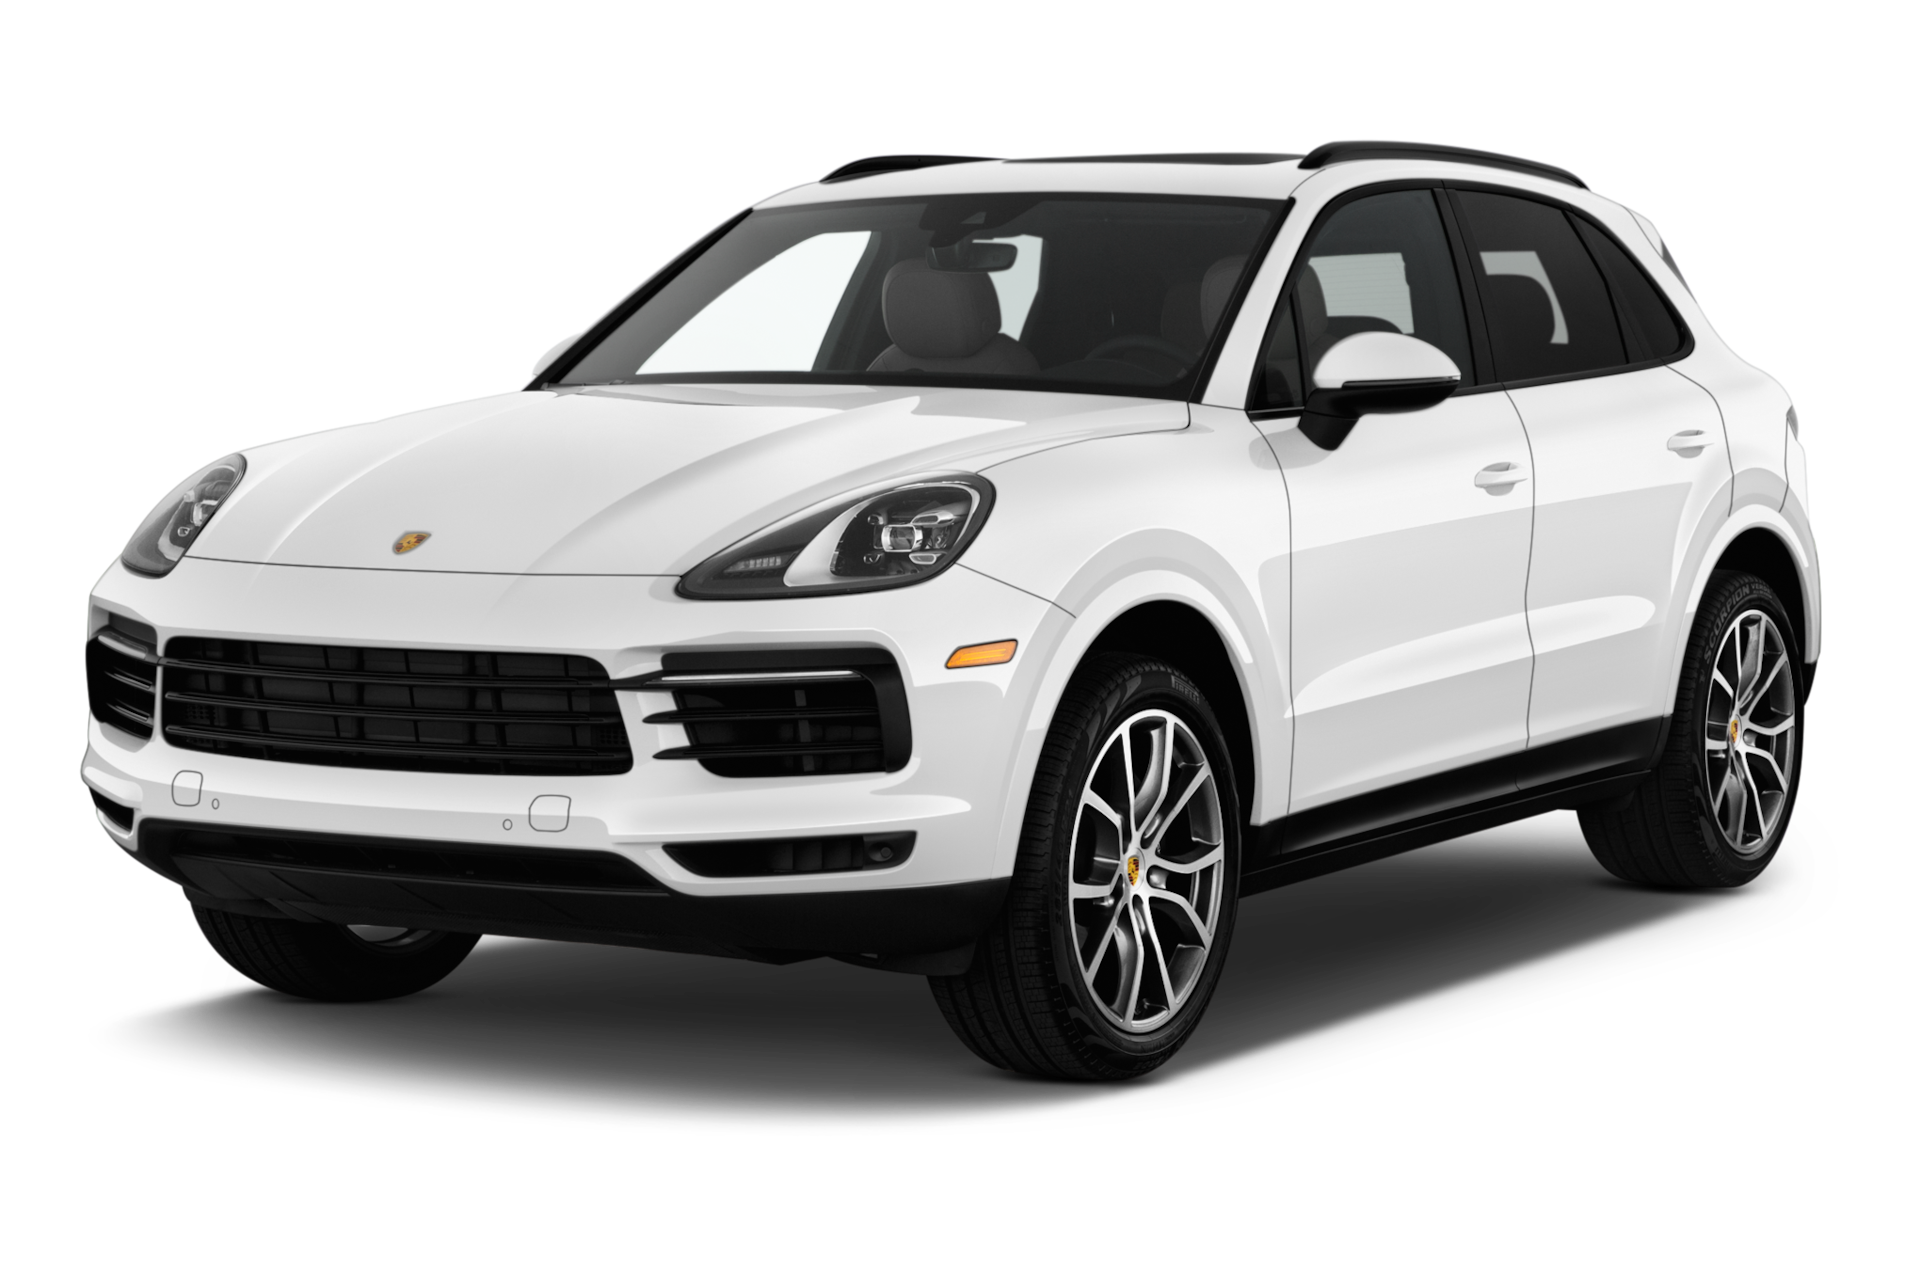 2019 Porsche Cayenne Prices, Reviews, and Photos - MotorTrend